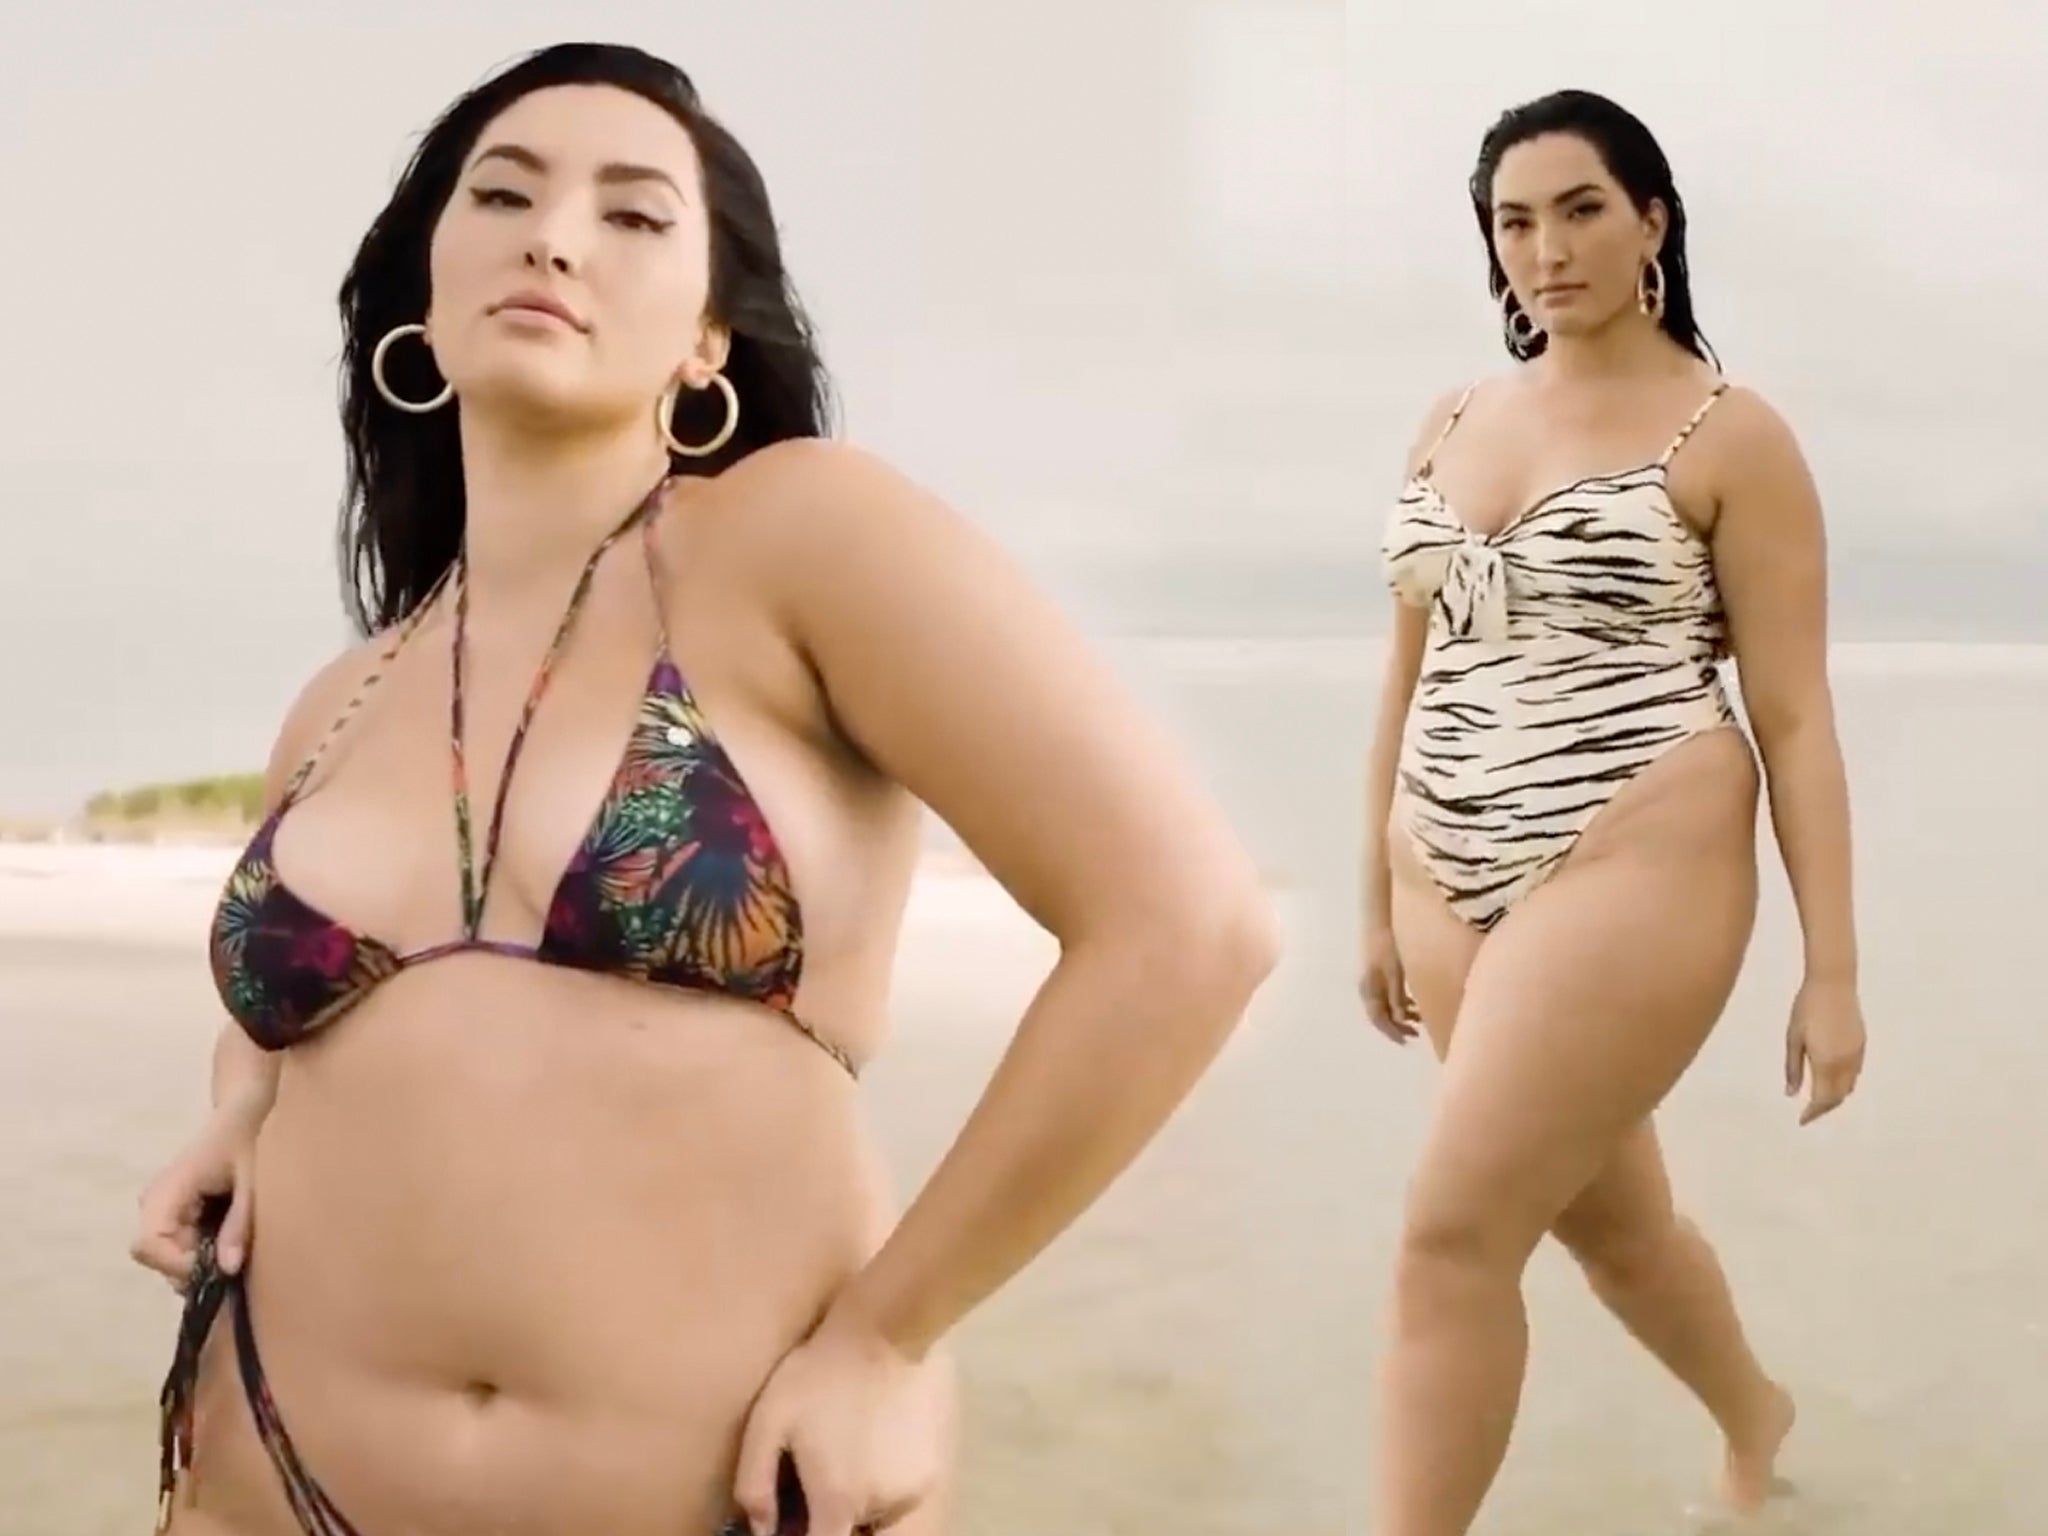 Naked Asian Sports Videos - Sports Illustrated's first plus-size Asian model Yumi Nu says it's an  'incredible honour' | The Independent